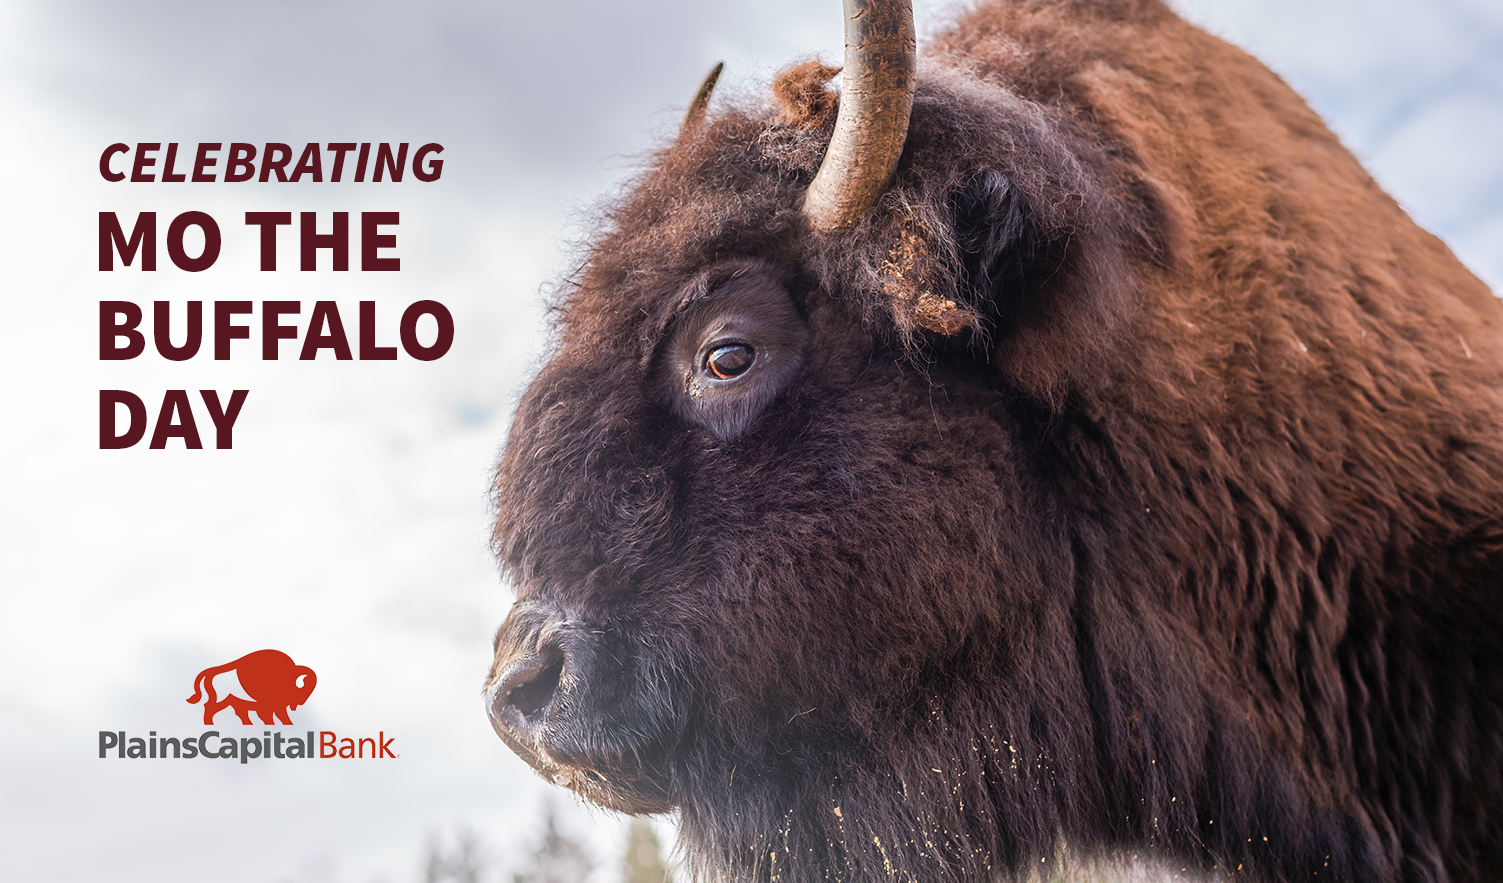 PlainsCapital Bank on Twitter: "Happy Mo The Buffalo Day! We love our mascot Mo so much that we an entire day to him! Two years ago today, the North American Buffalo